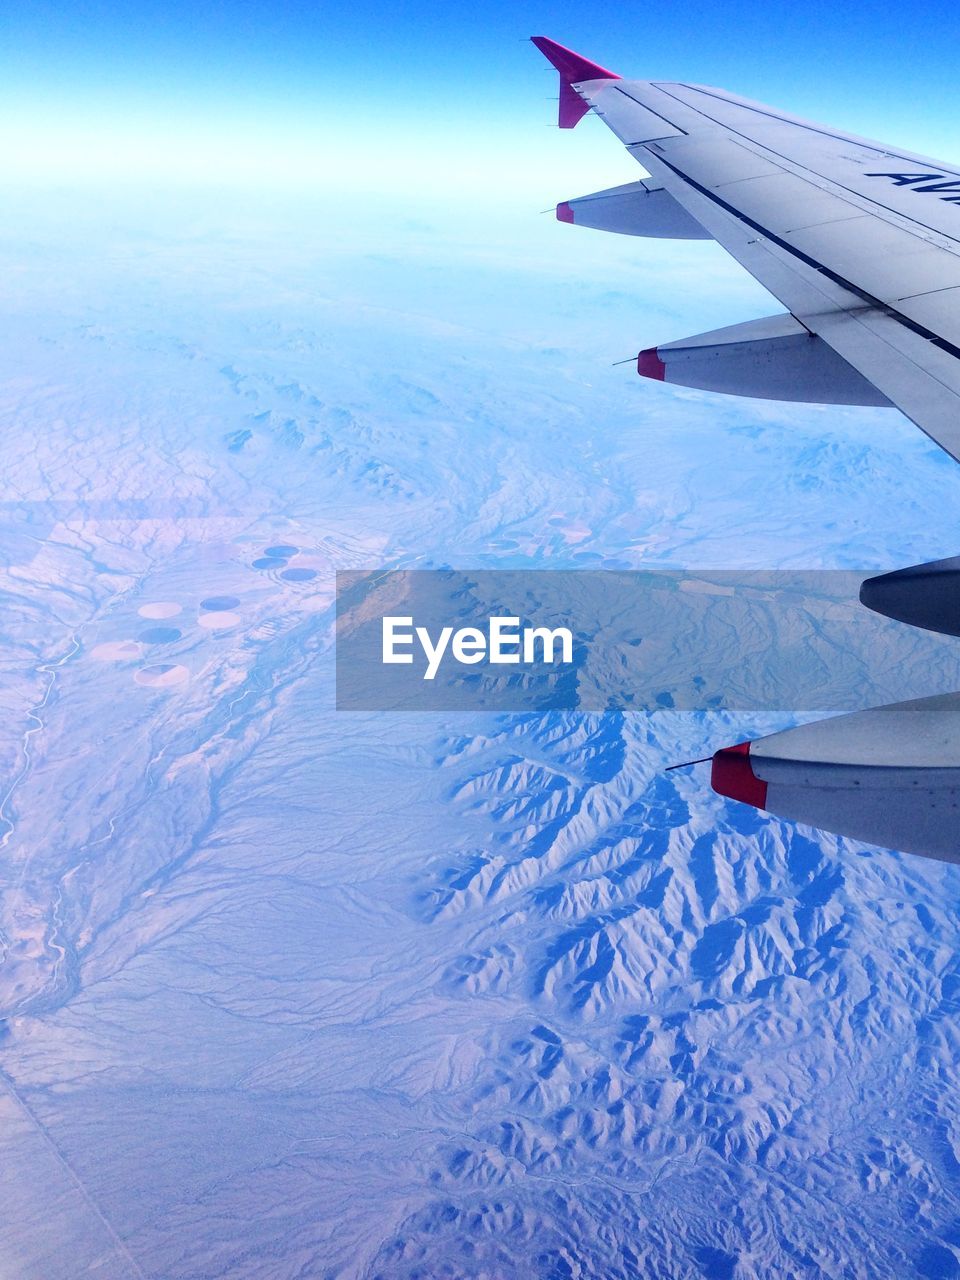 CROPPED IMAGE OF AIRPLANE WING OVER MOUNTAINS